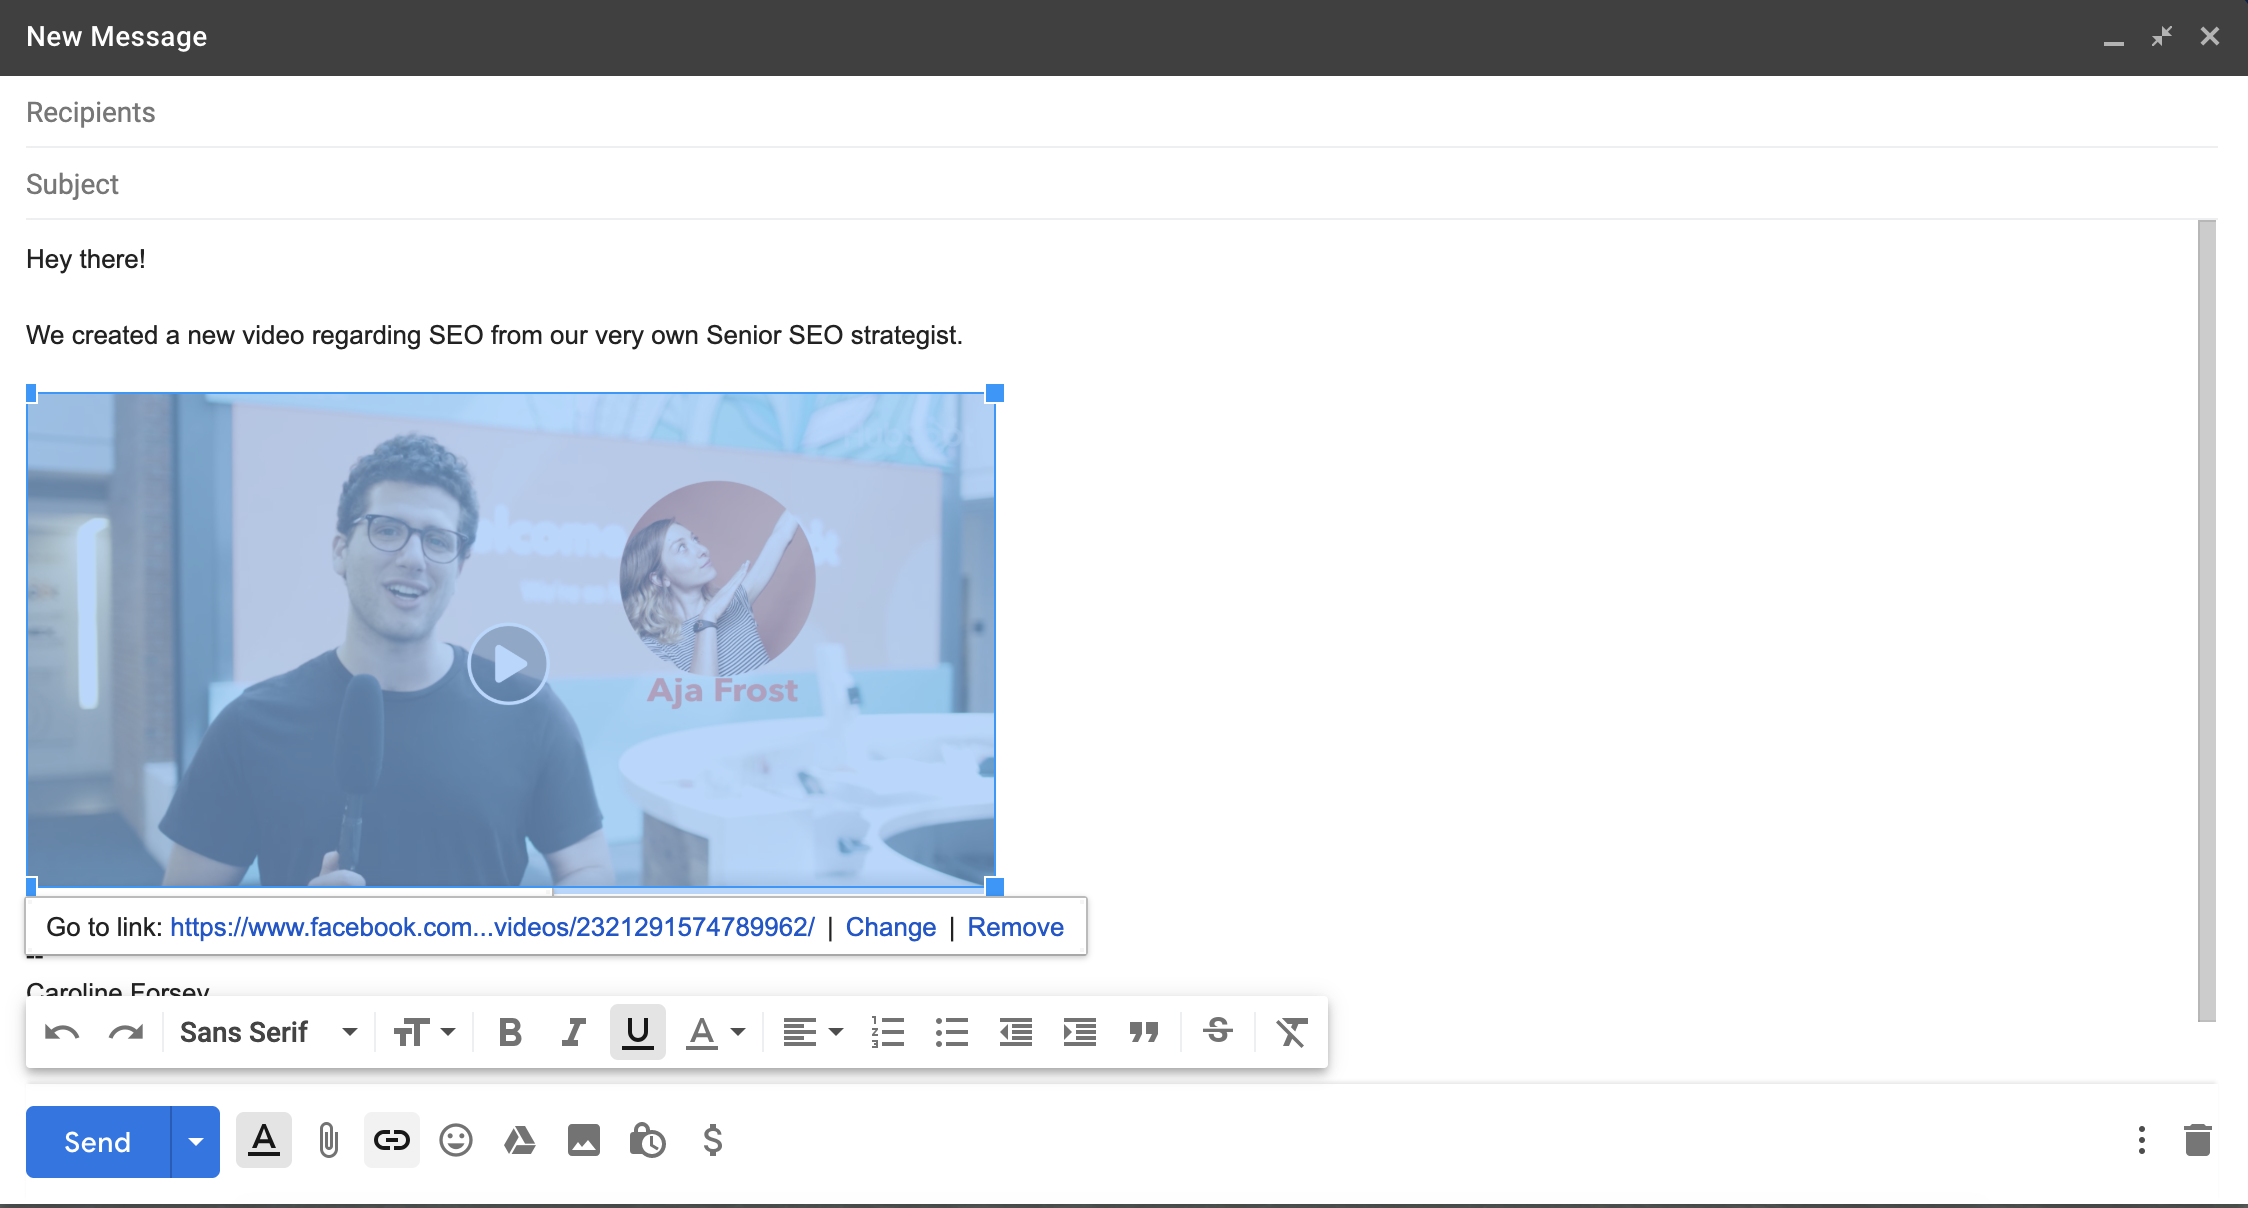 embed video hosting site's video in outlook e-mail